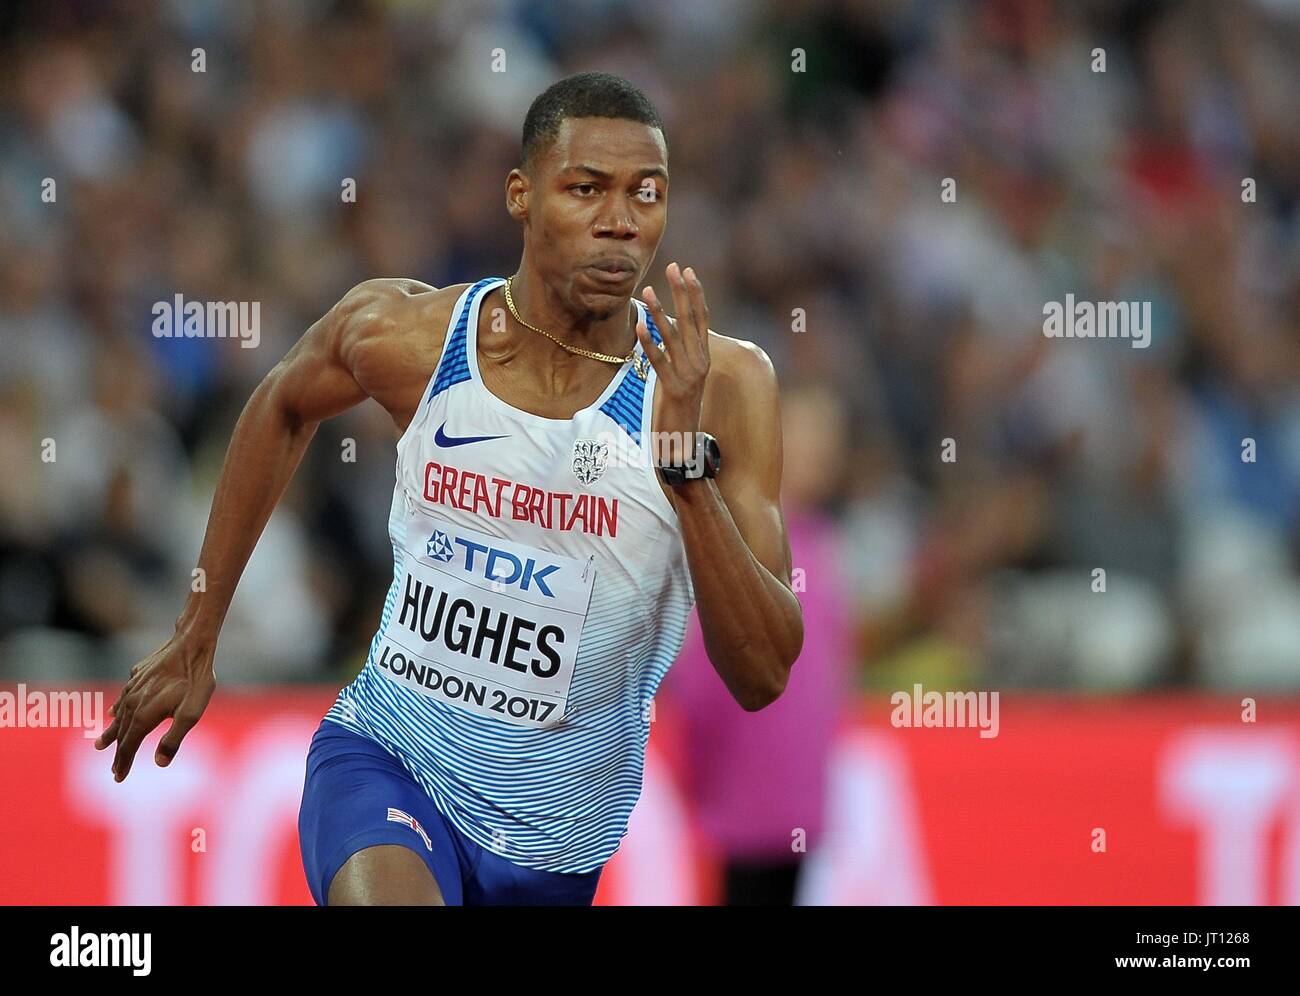 London, UK. 7th Aug, 2017. Zharnel HUGHES (GBR) in the mens 200m heats. IAAF world athletics championships. London Olympic stadium. Queen Elizabeth Olympic park. Stratford. London. UK. 07/08/2017. Credit: Sport In Pictures/Alamy Live News Stock Photo